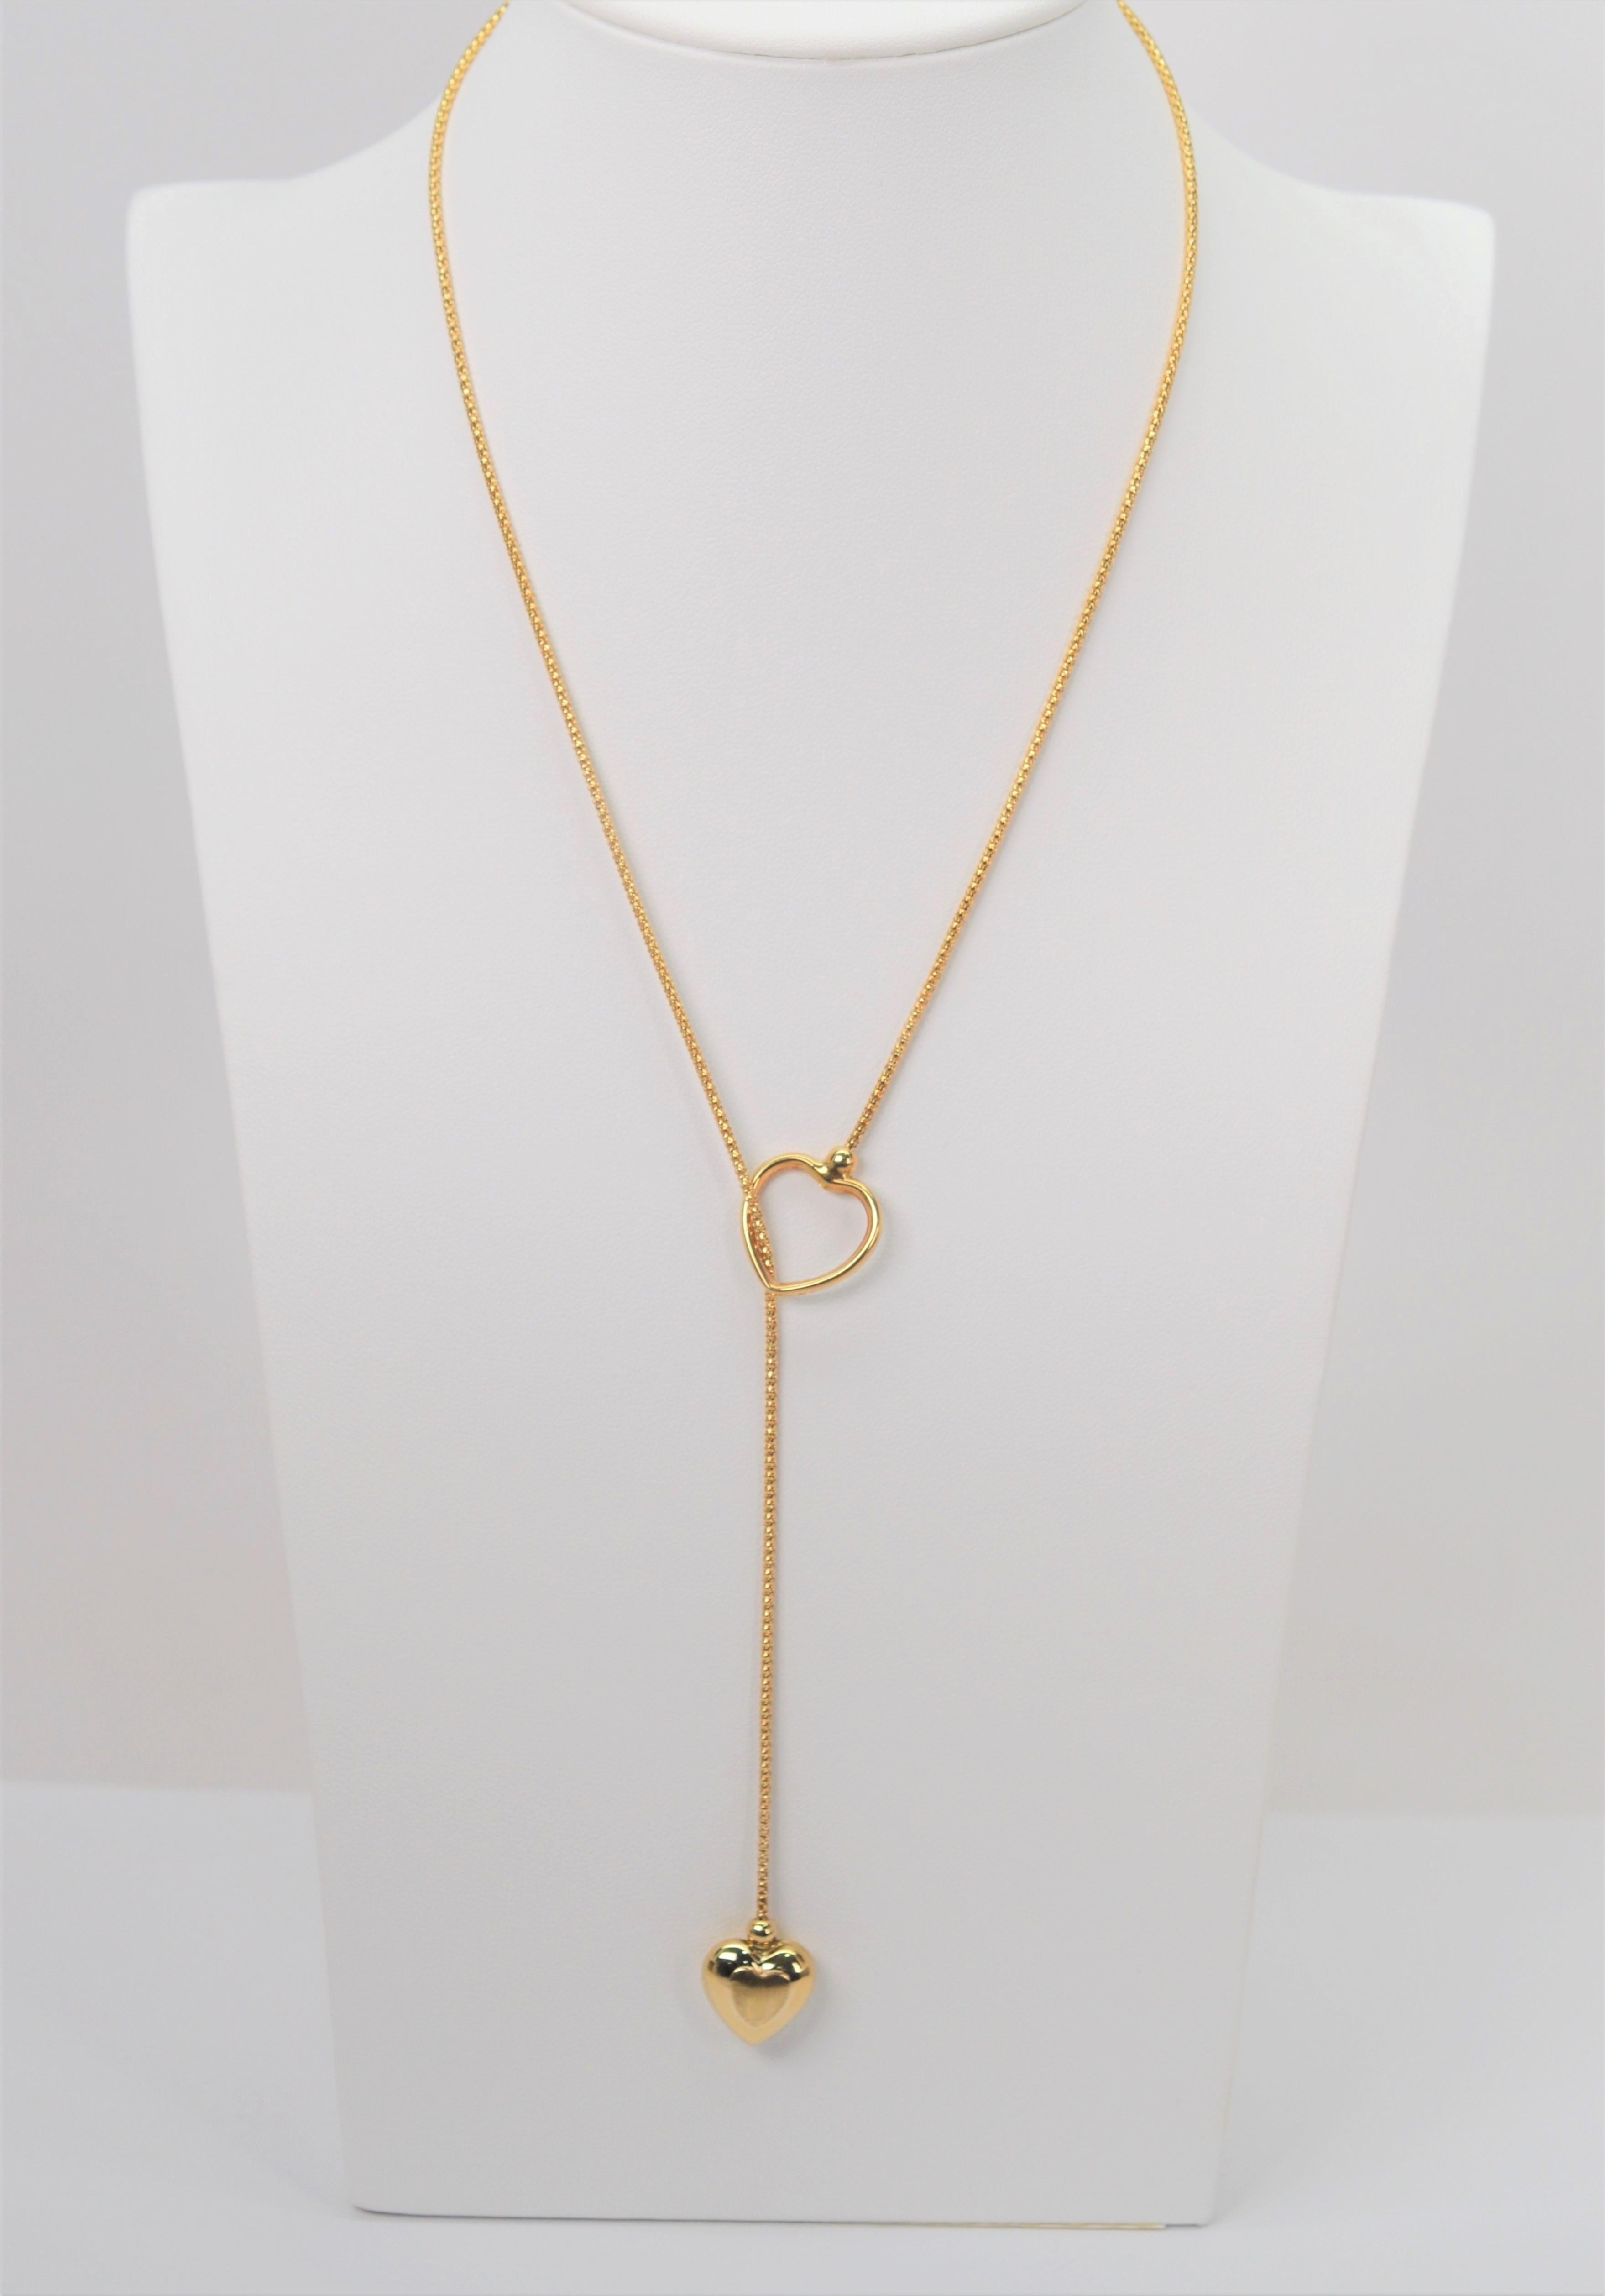 A soft twenty inch round mesh chain of fourteen karat 14K yellow gold hosts companion gold heart charms that thread to create the adorable dangling heart drop of this Italian made lariat style necklace. Adjustable and stylish with wide appeal for